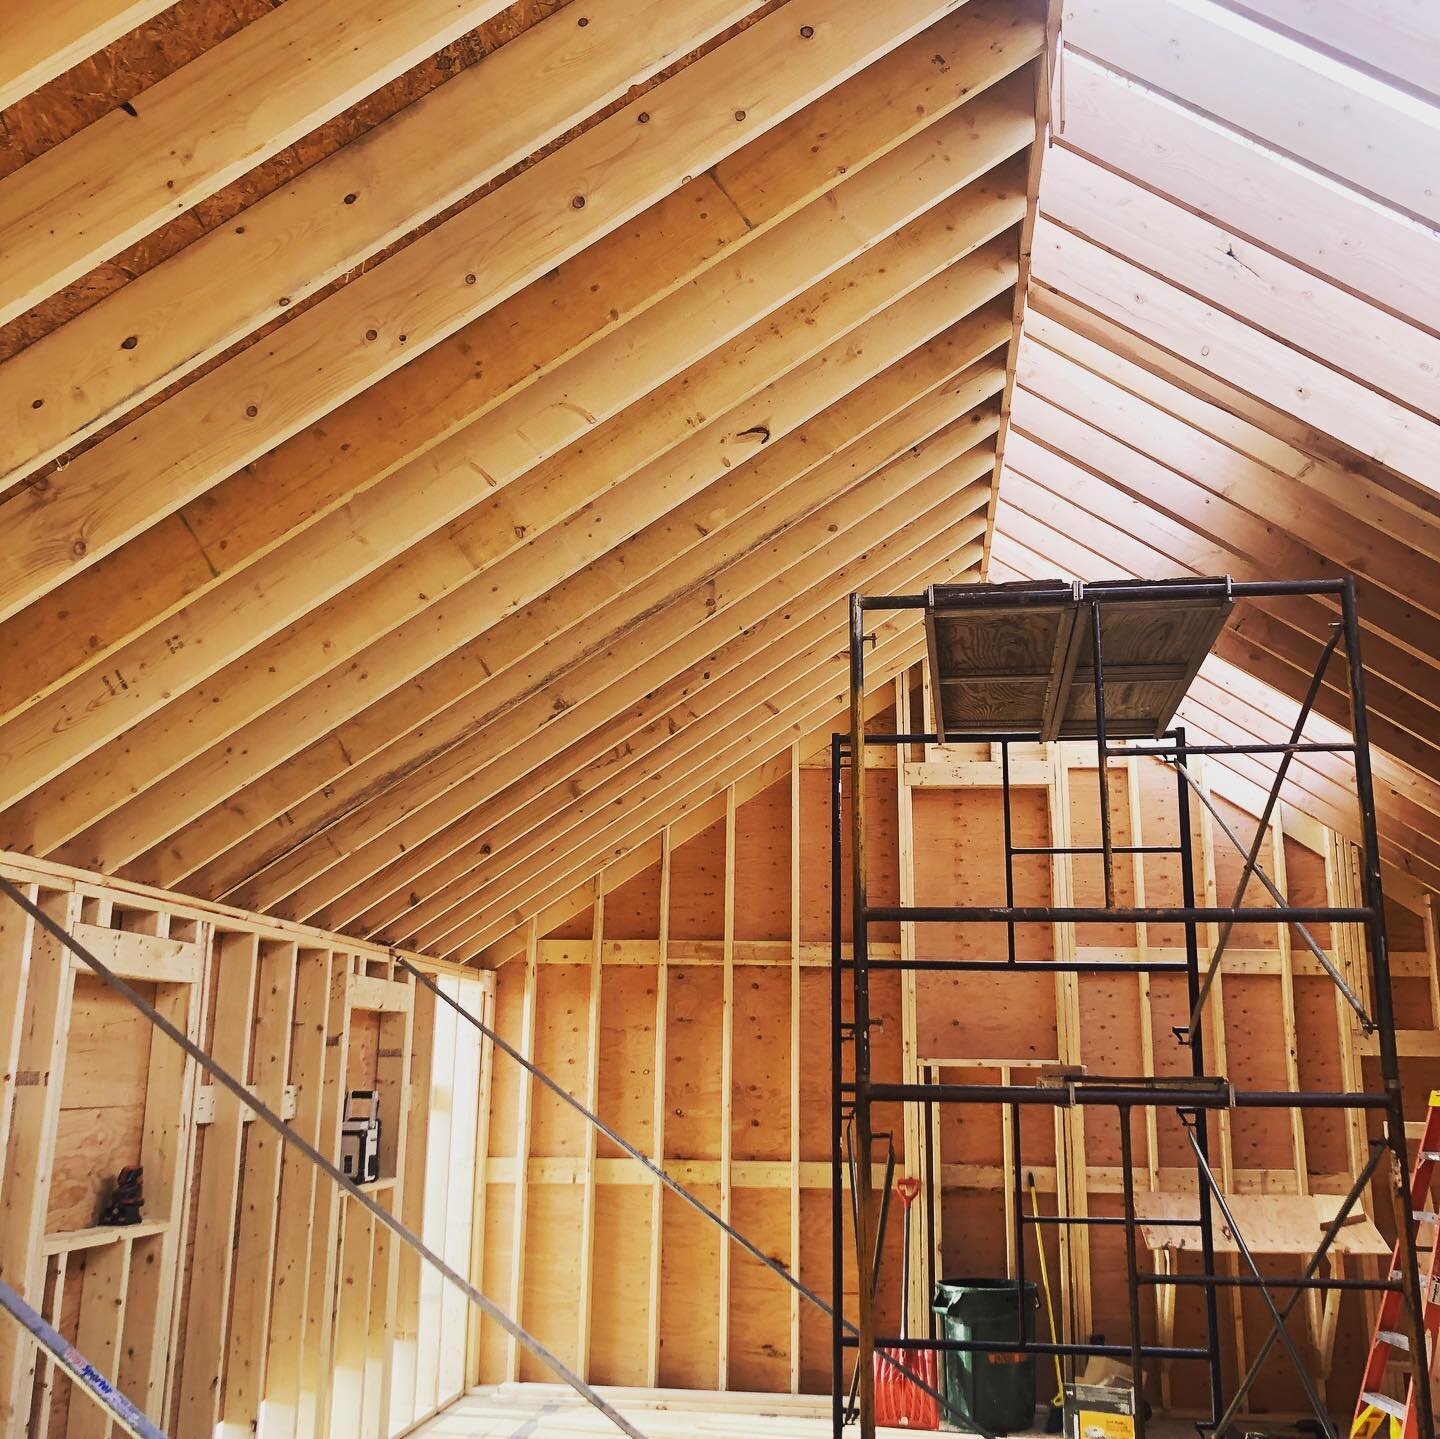 Beautiful frame work underway at one of our residential renovations #framing #construction #residential #maine